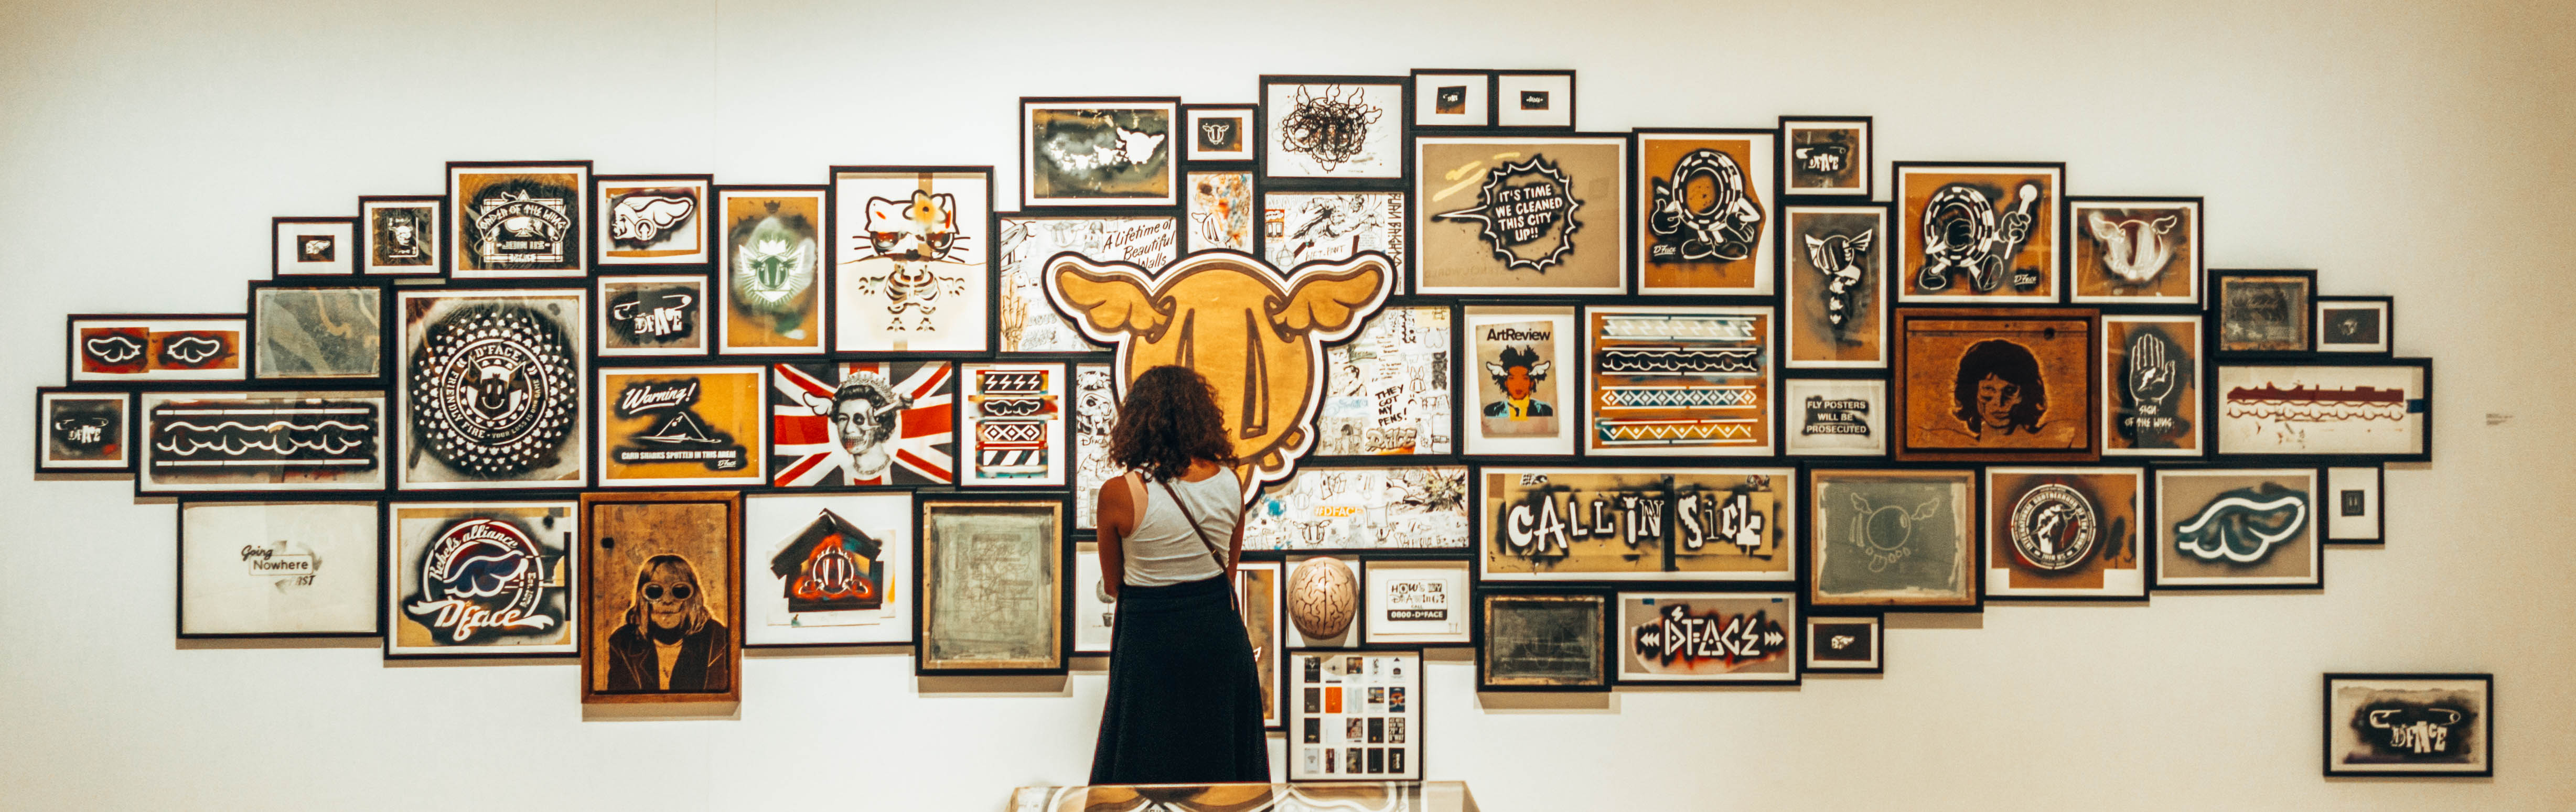 Art from the Streets at the ArtScience Museum - 3-day Singapore itinerary for budget travelers - WeDidItOurWay.com